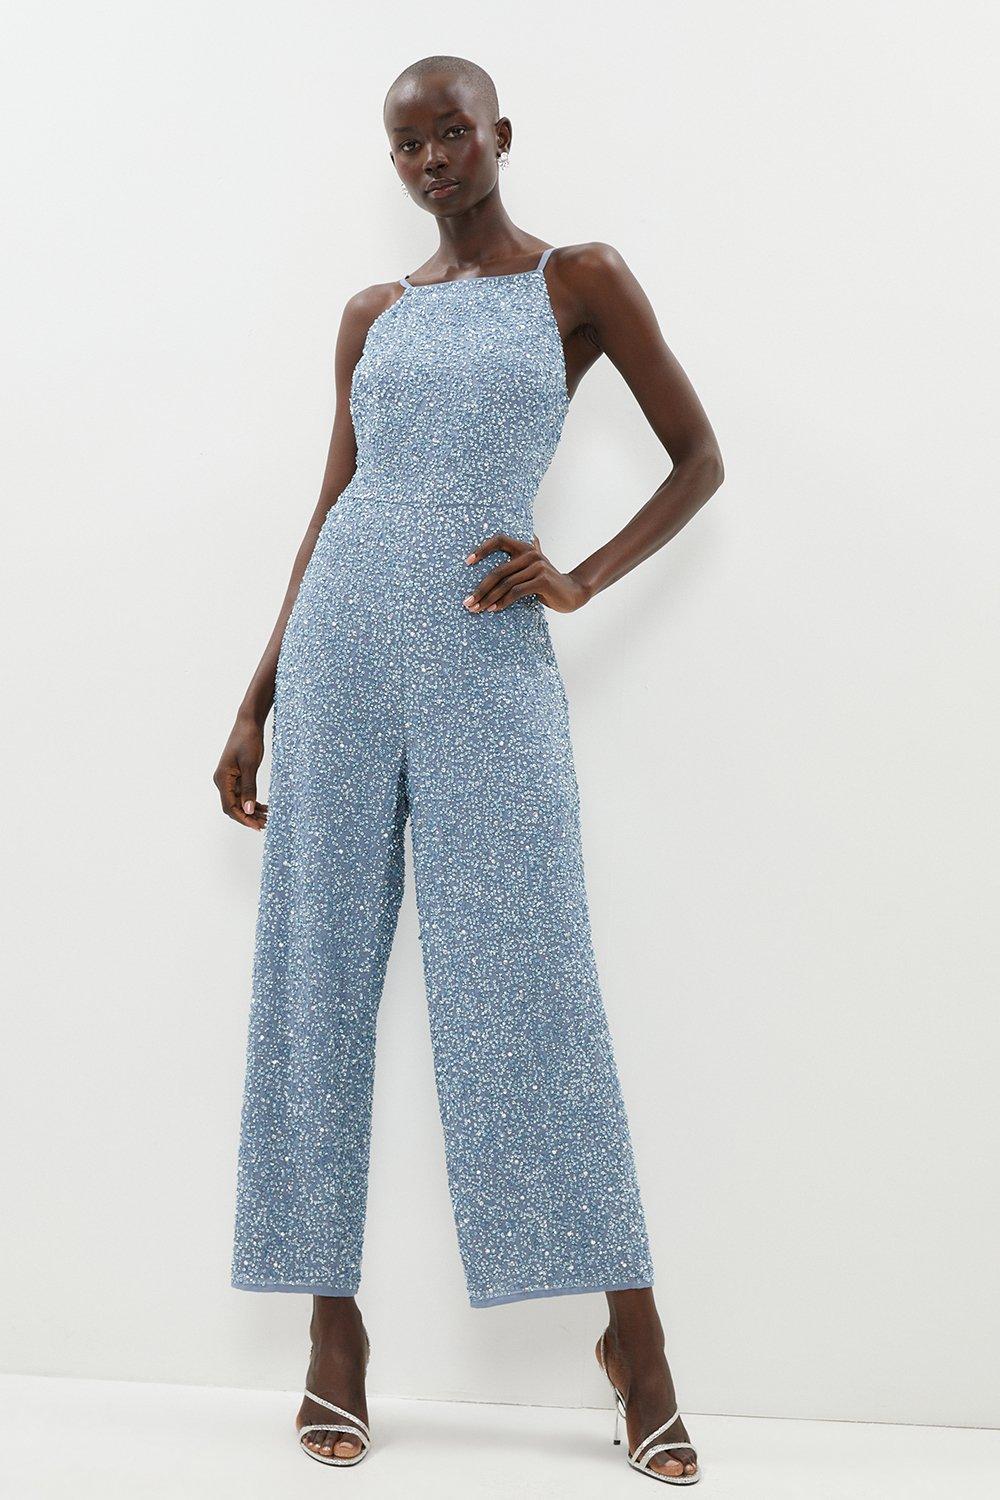 All Over Sequin Strappy Jumpsuit - Dusty Blue